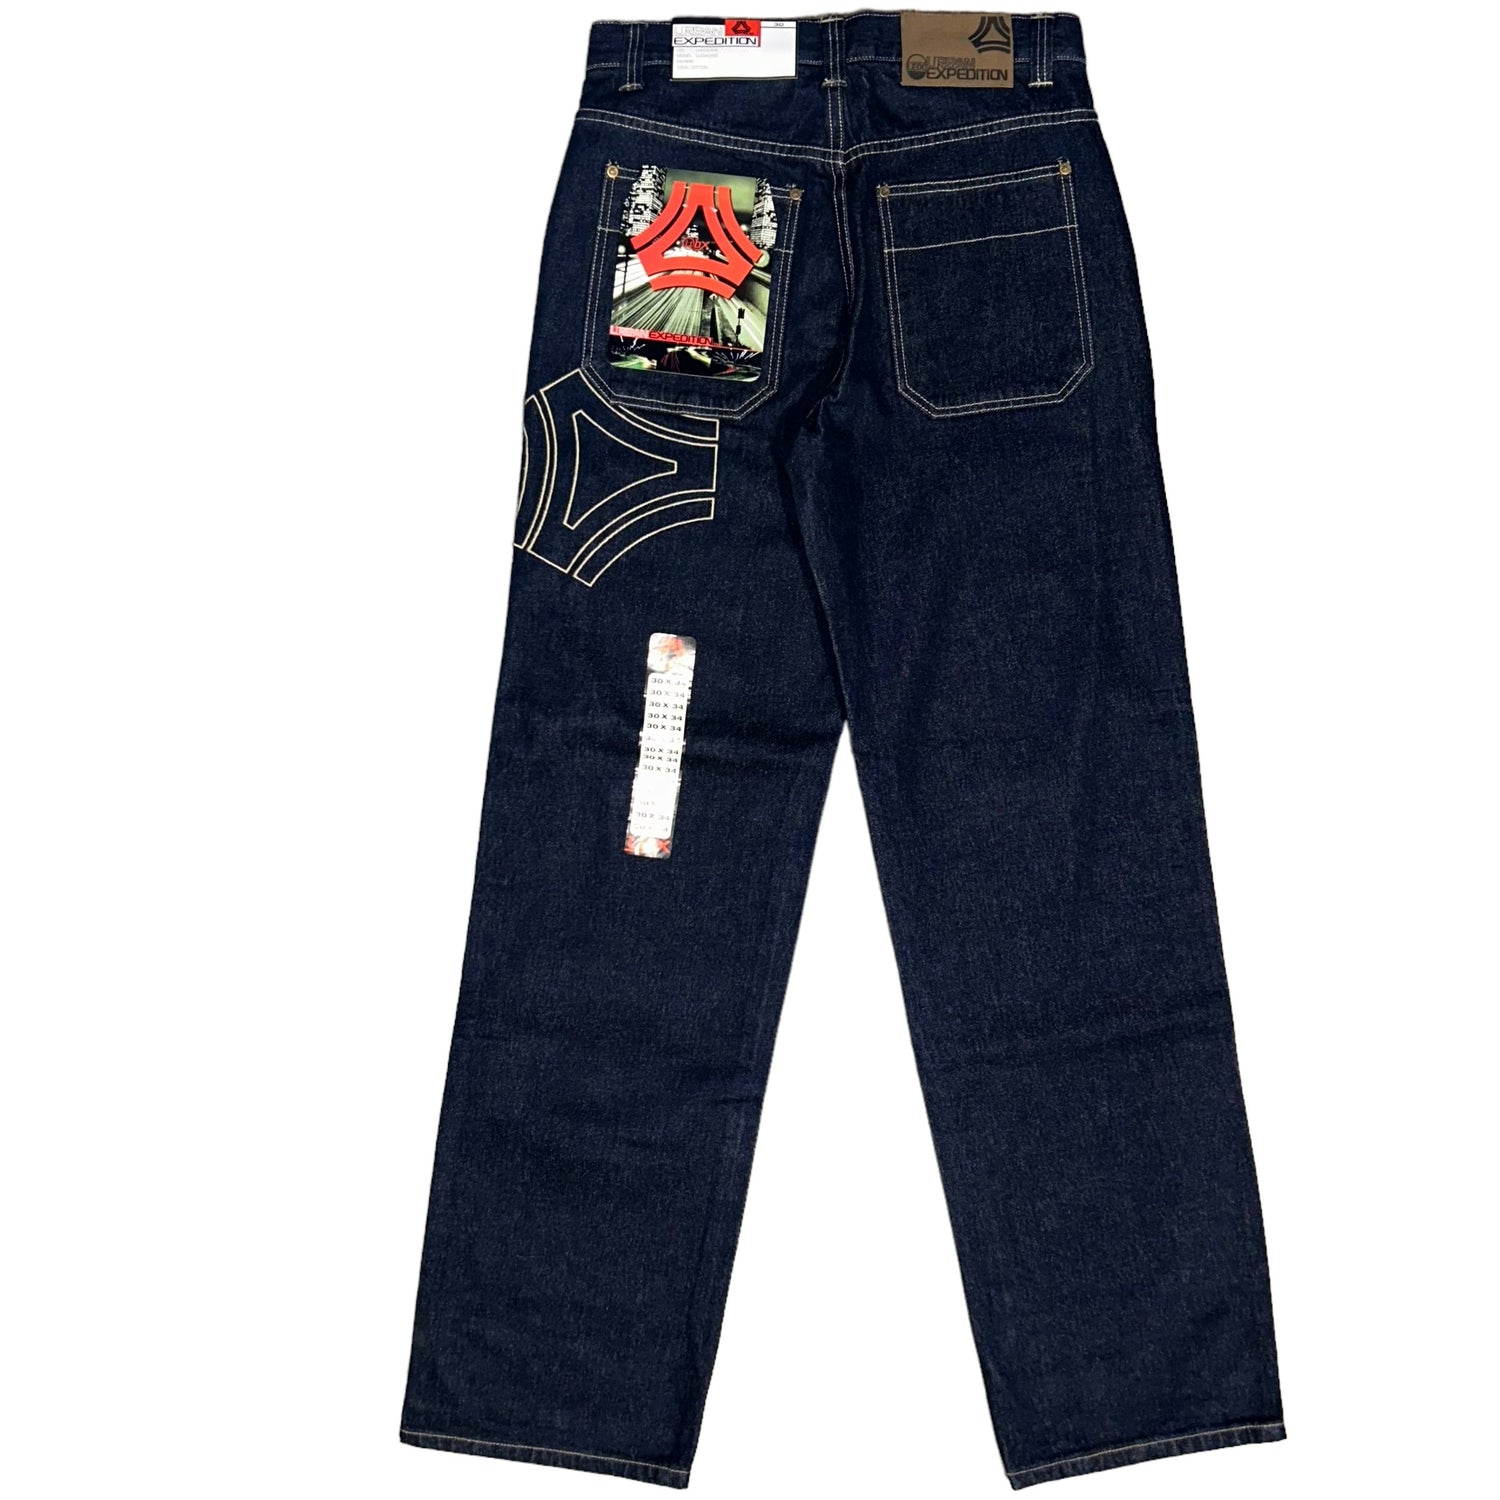 Baggy jeans Urban Expedition UBX vintage - oldstyleclothing